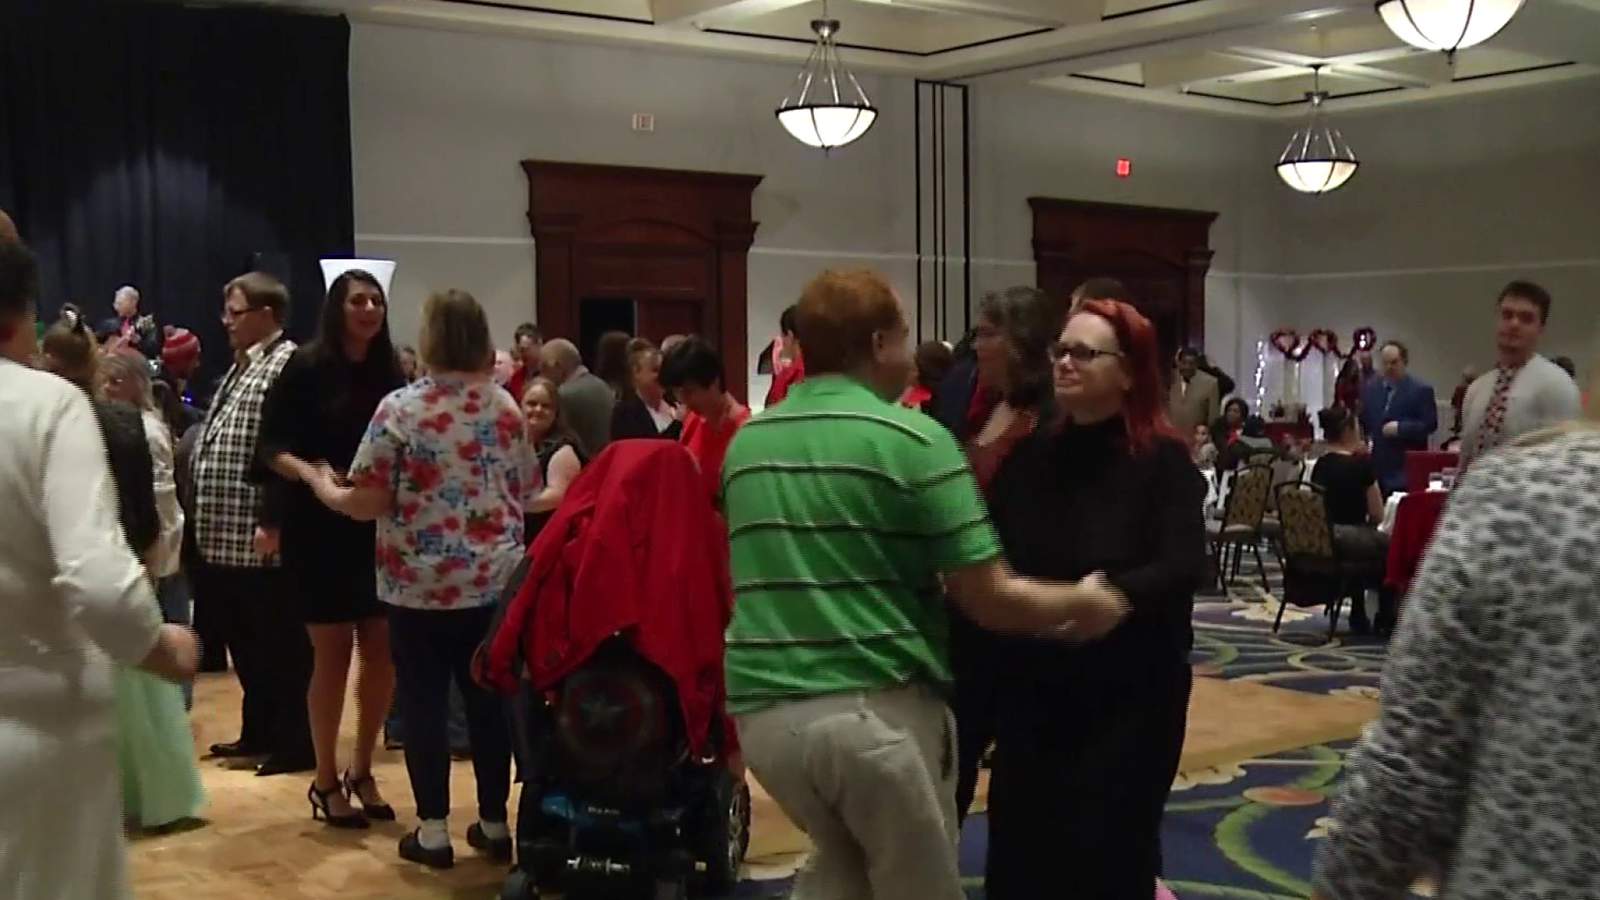 Roanoke’s Valentine’s Day Dance for the disabled celebrates 35 years of partying